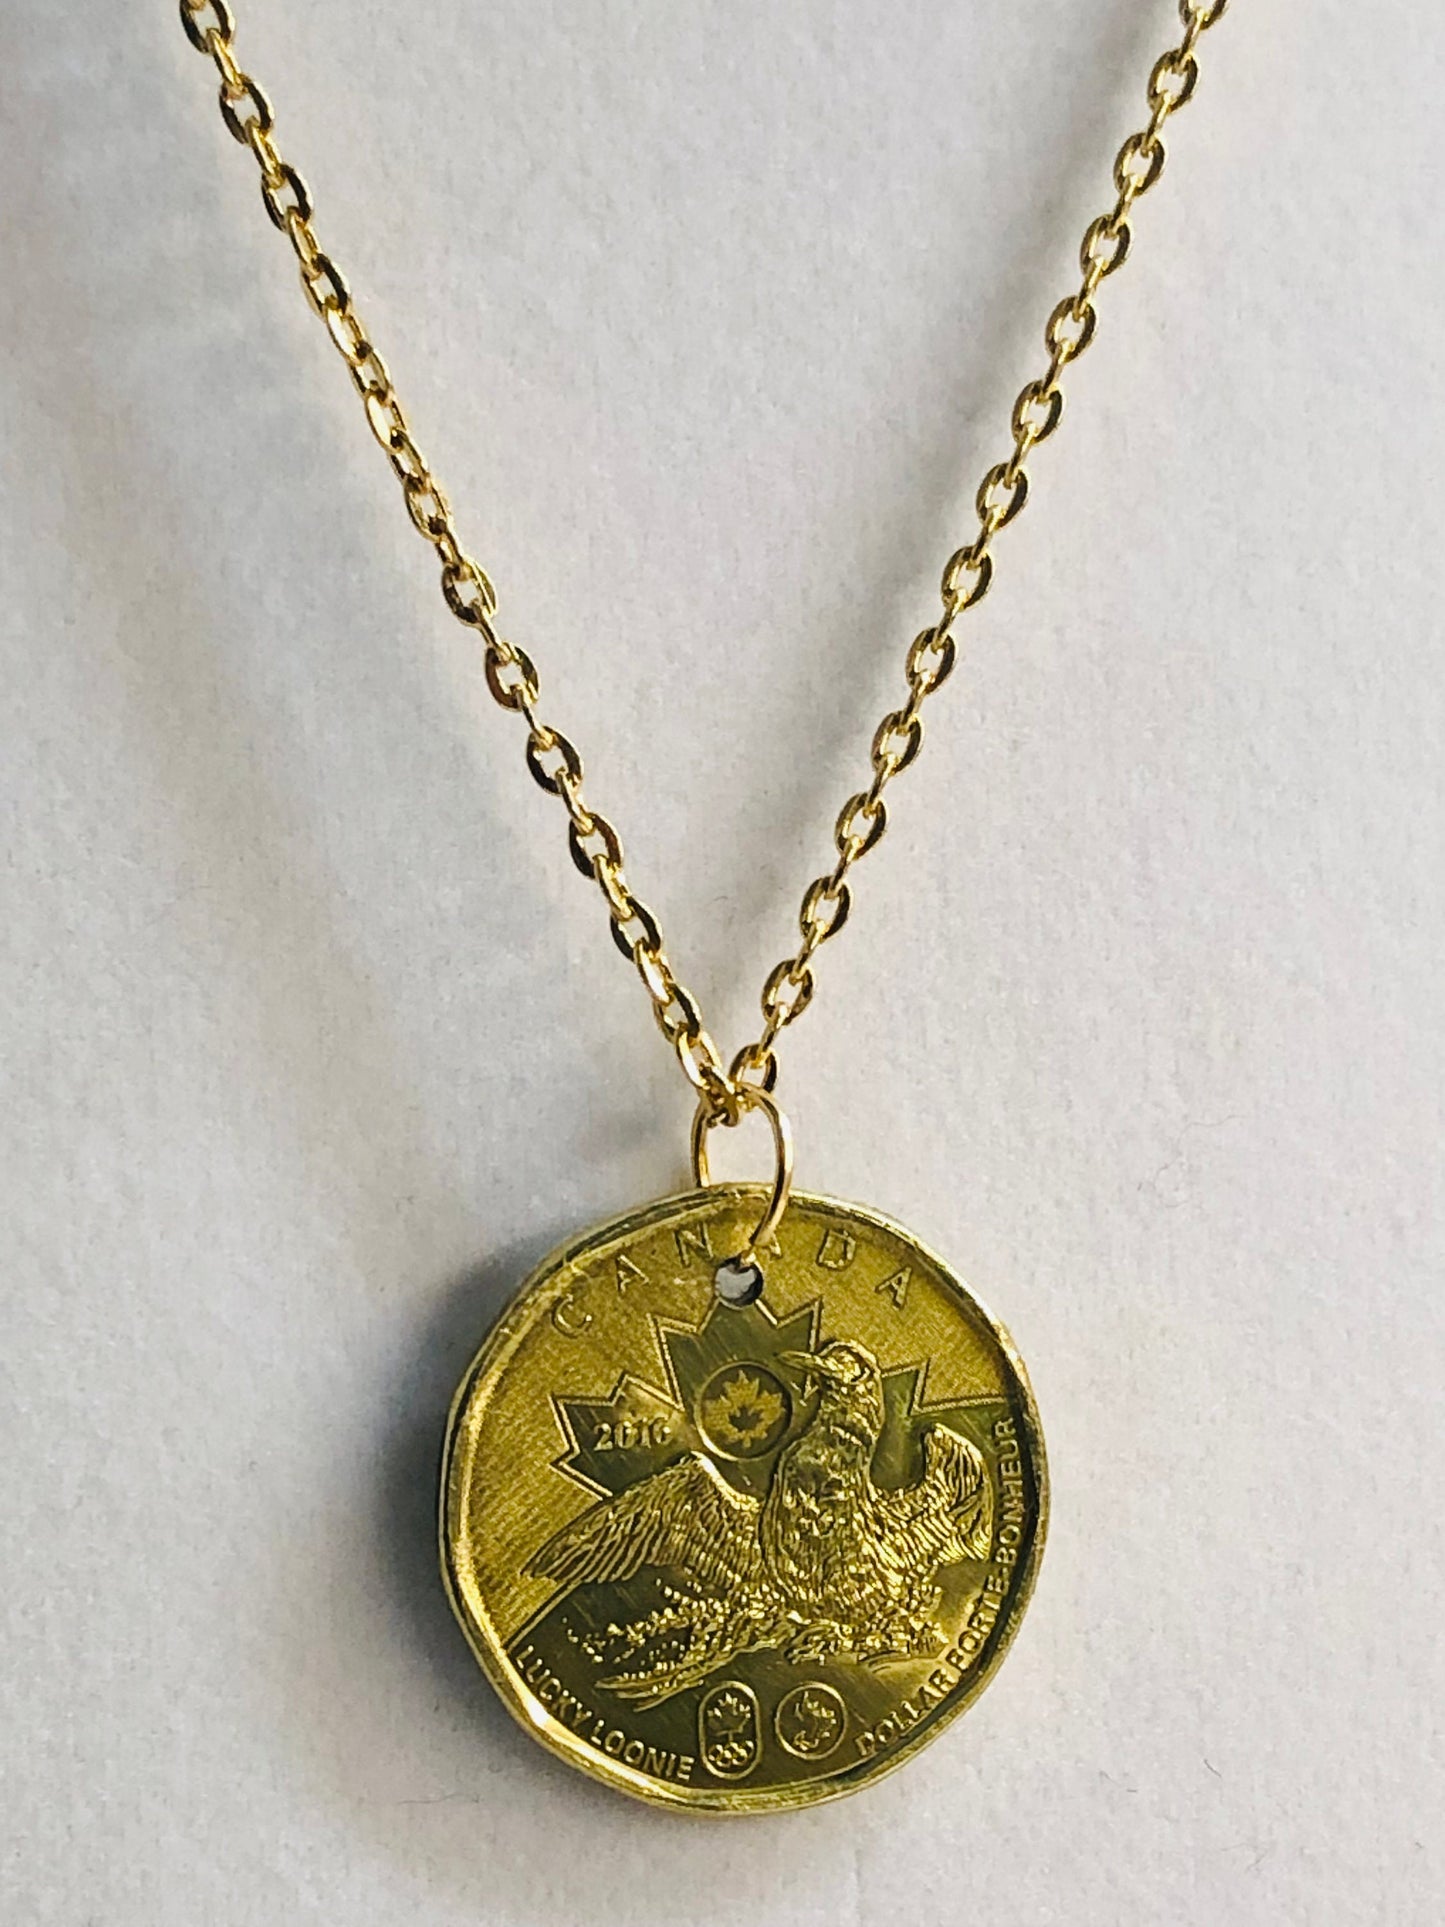 Canada Coin Necklace Pendant 2016 Flying Loon Dollar Loonie Custom Vintage Made Rare coins - Coin Enthusiast Fashion Handmade